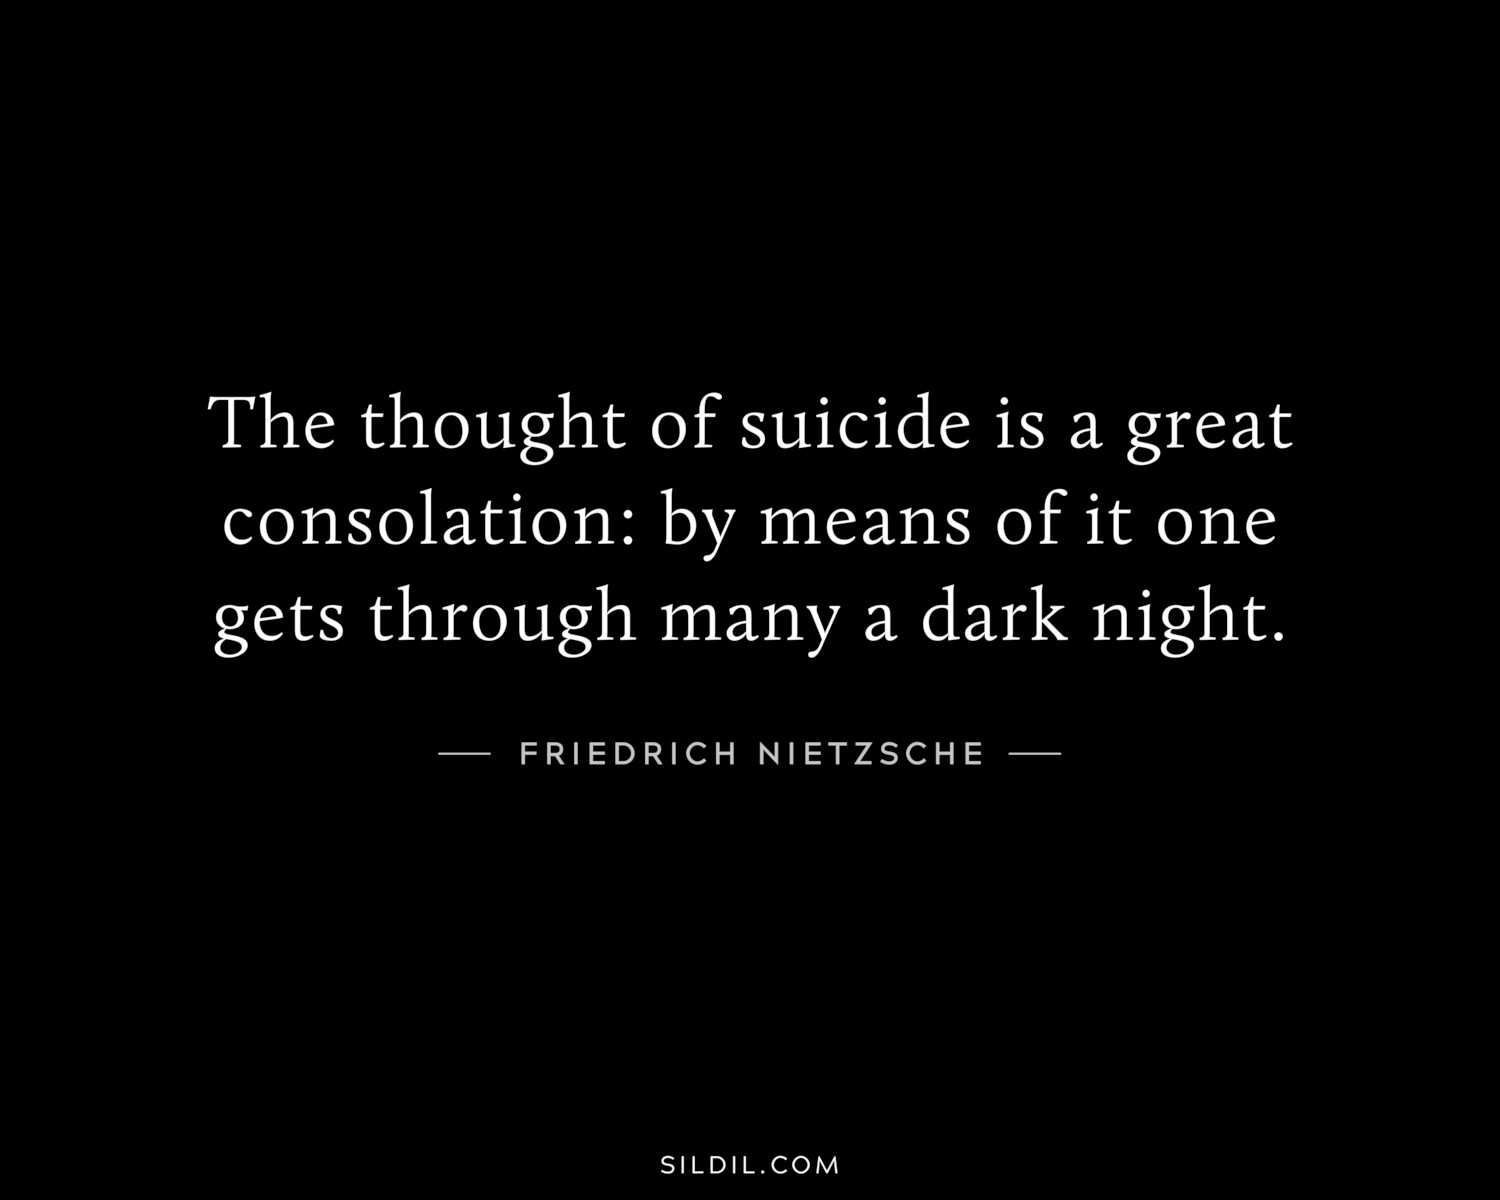 The thought of suicide is a great consolation: by means of it one gets through many a dark night.